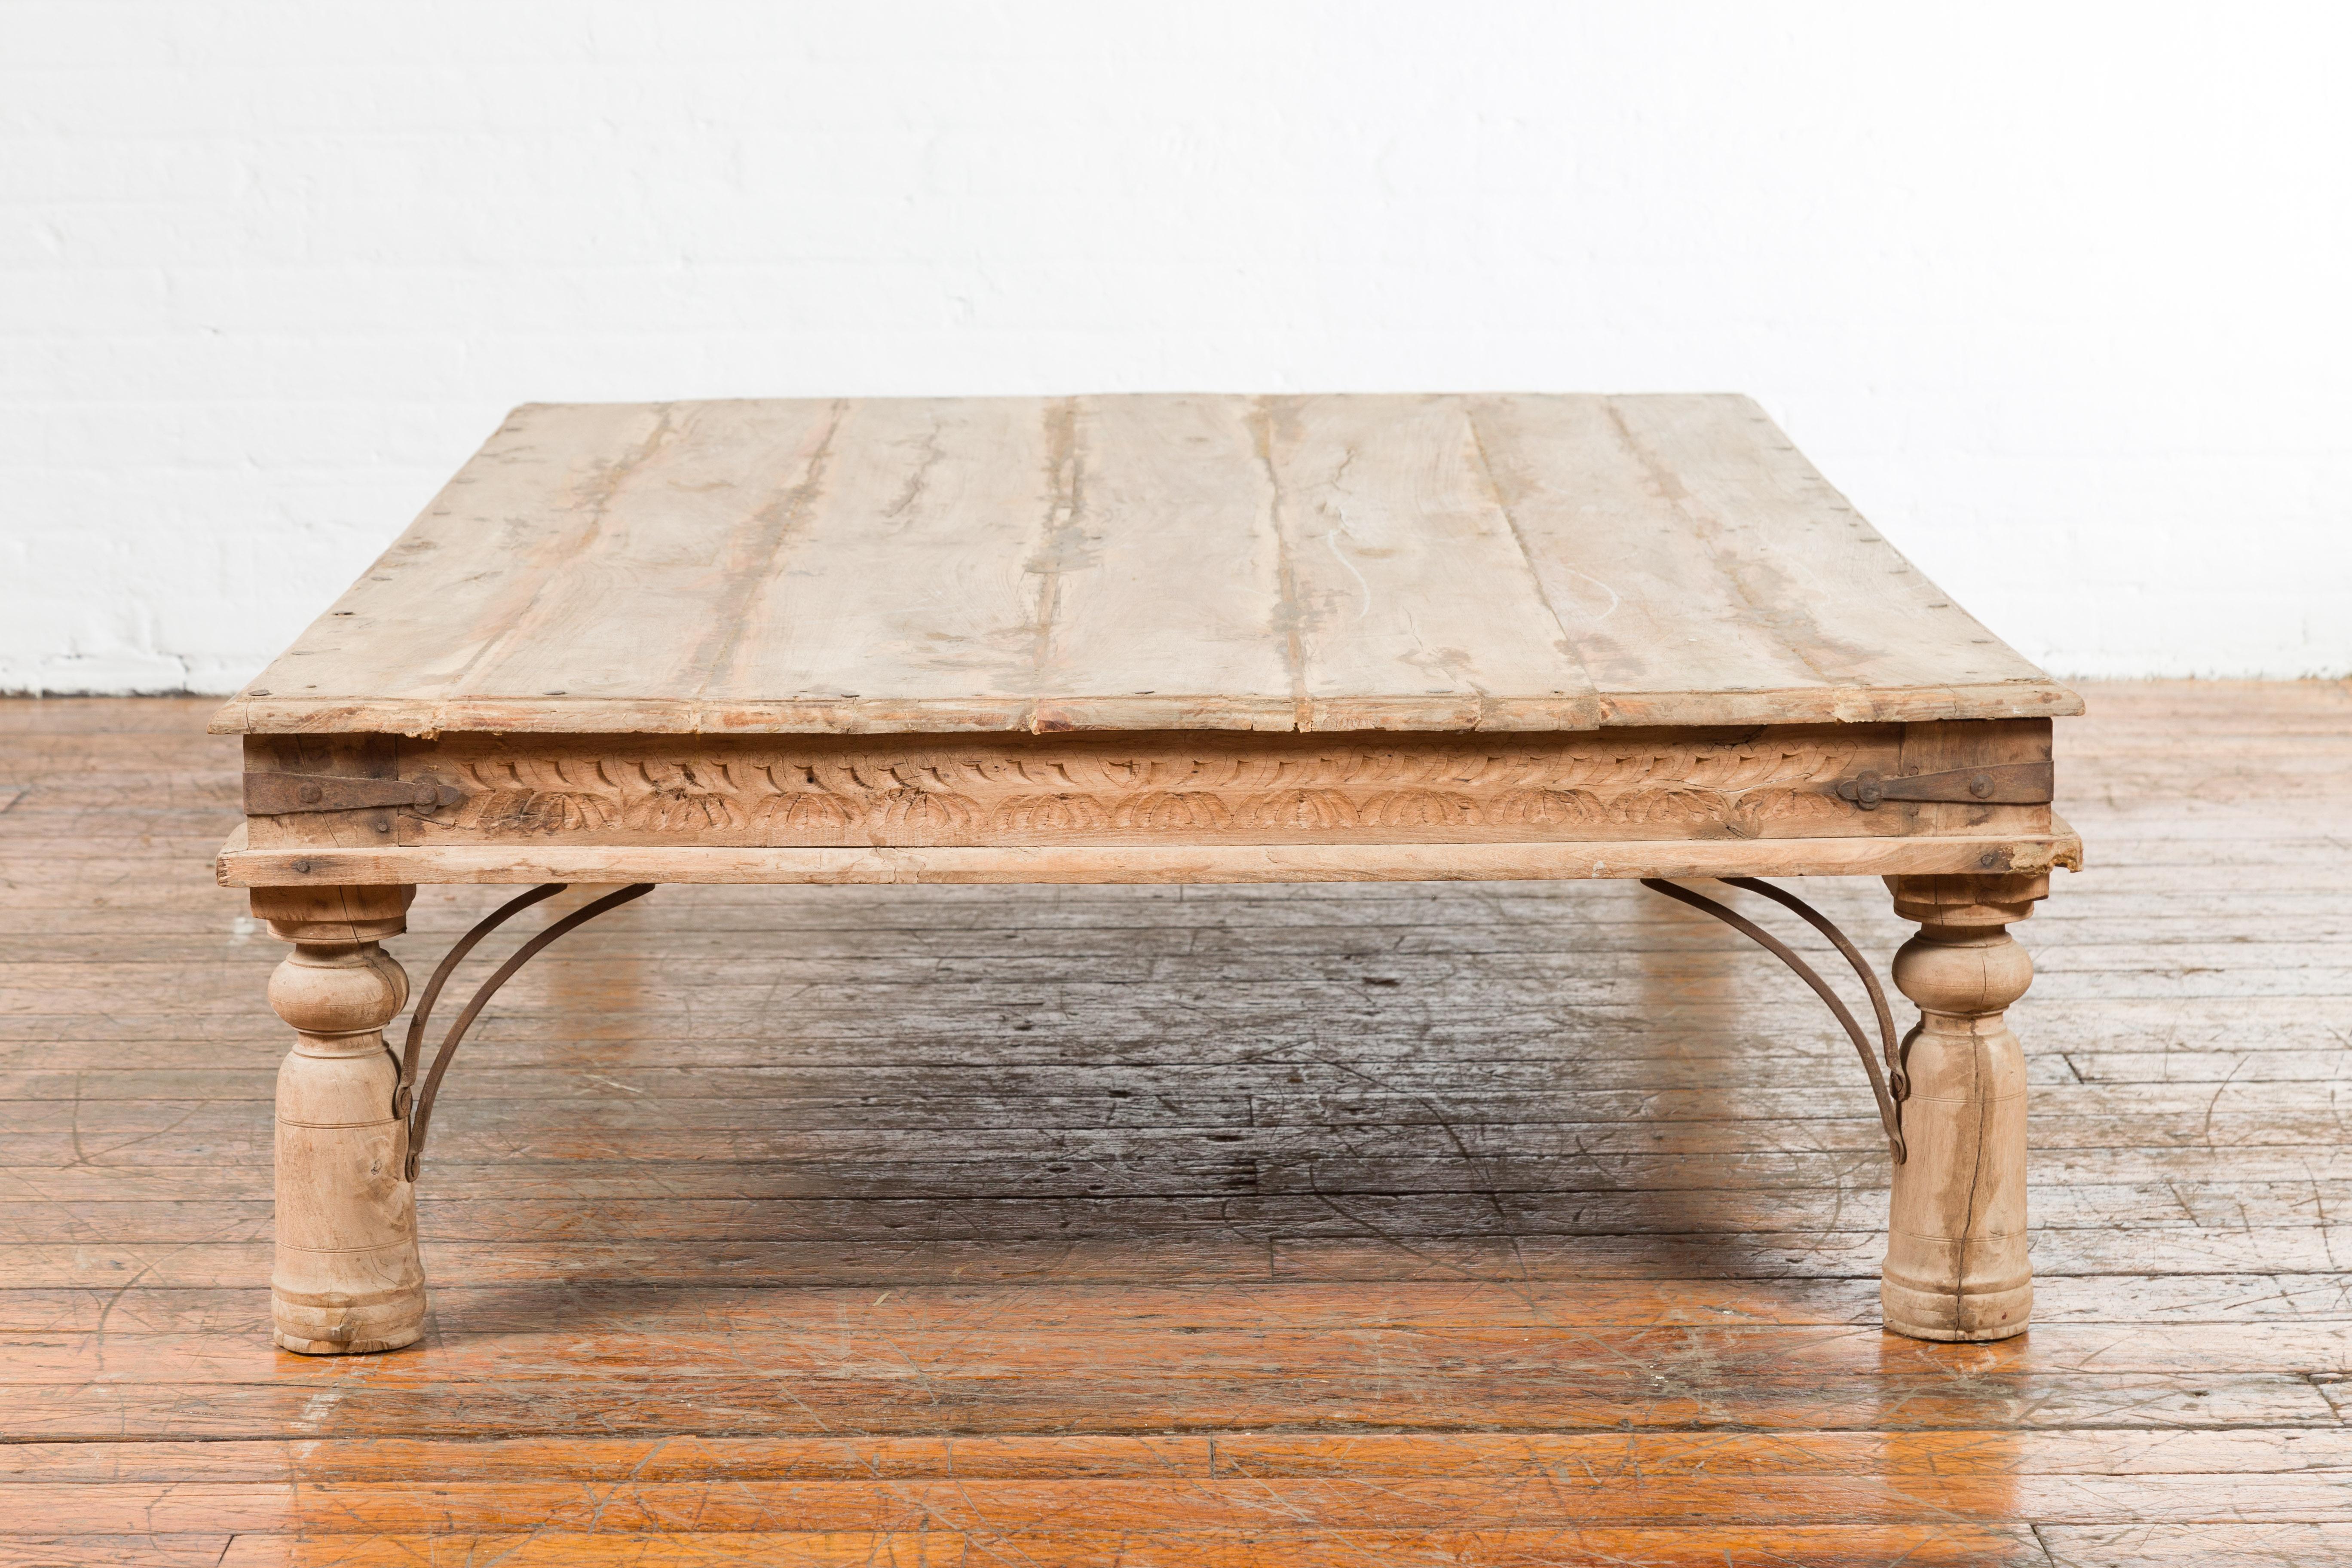 Oversized Early 20th Century Indian Rustic Coffee Table with Iron Accents 8